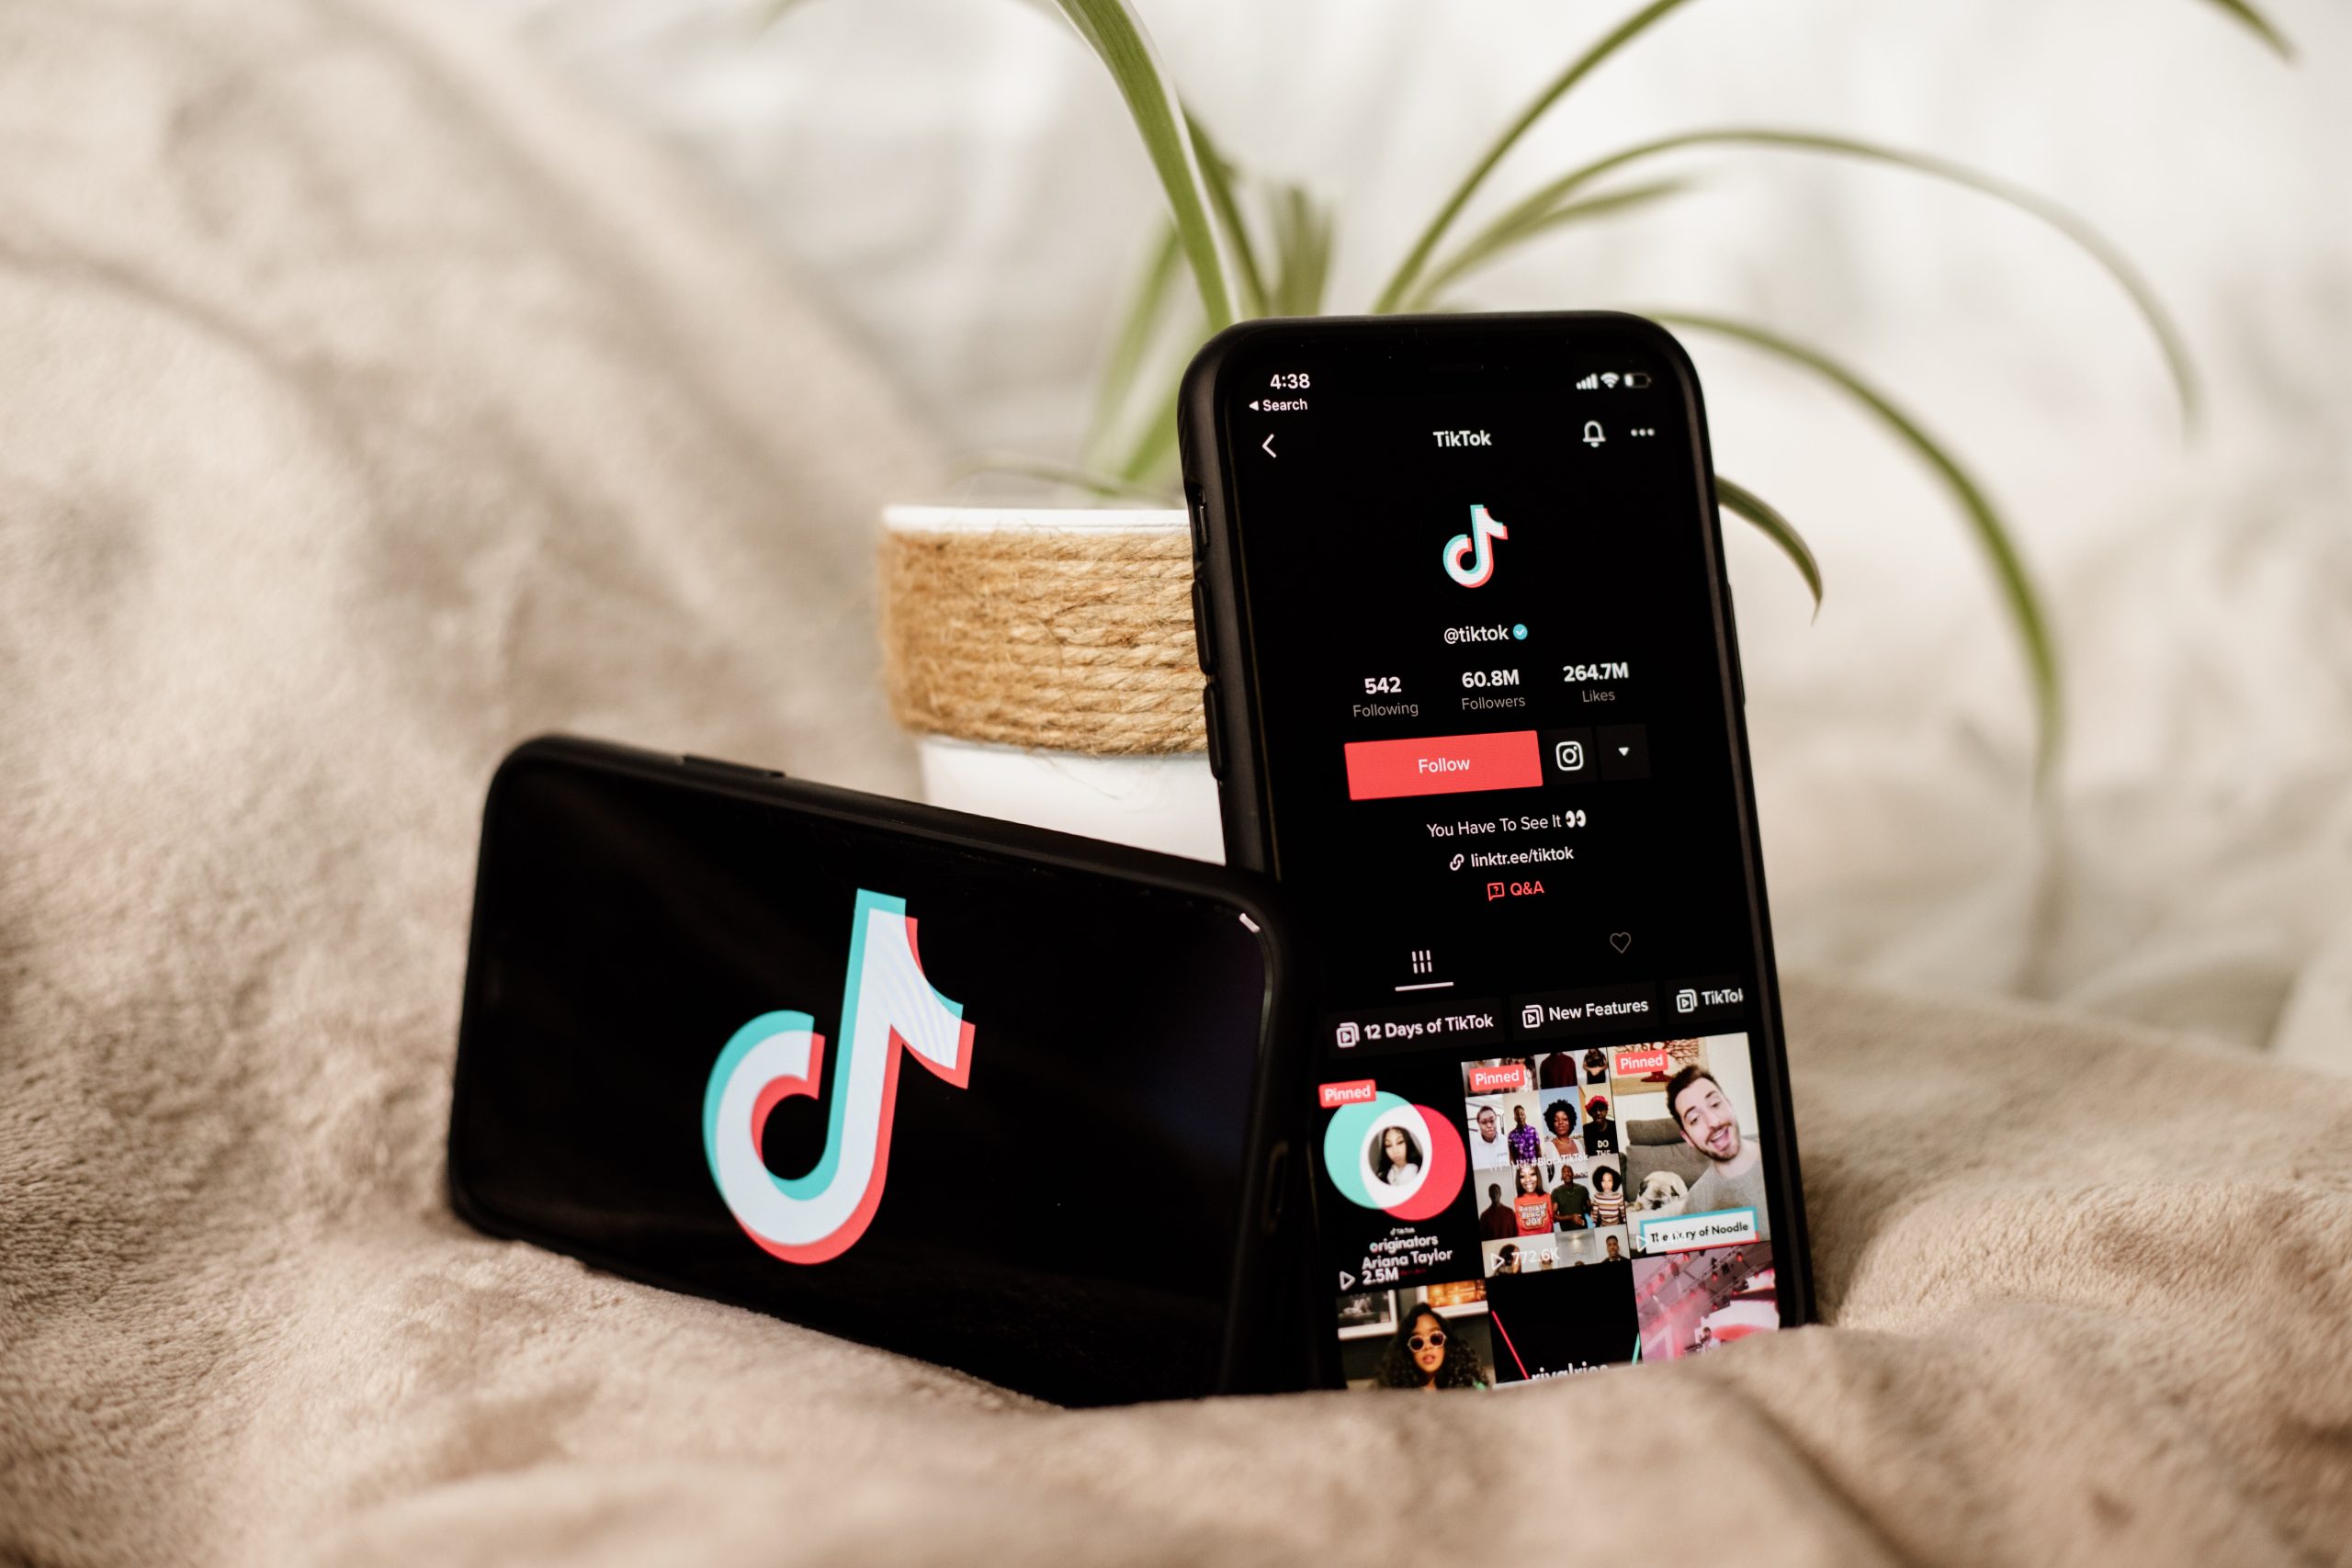 TikTok has quickly become one of the most popular social media platforms in Nigeria. With its engaging short-form videos and massive user base, TikTok offers a unique opportunity for Nigerian businesses to connect with their target audience in a fun and creative way. But before we dive into the strategies and tips for promoting your business on TikTok, let's take a closer look at why this platform is so powerful for marketing.